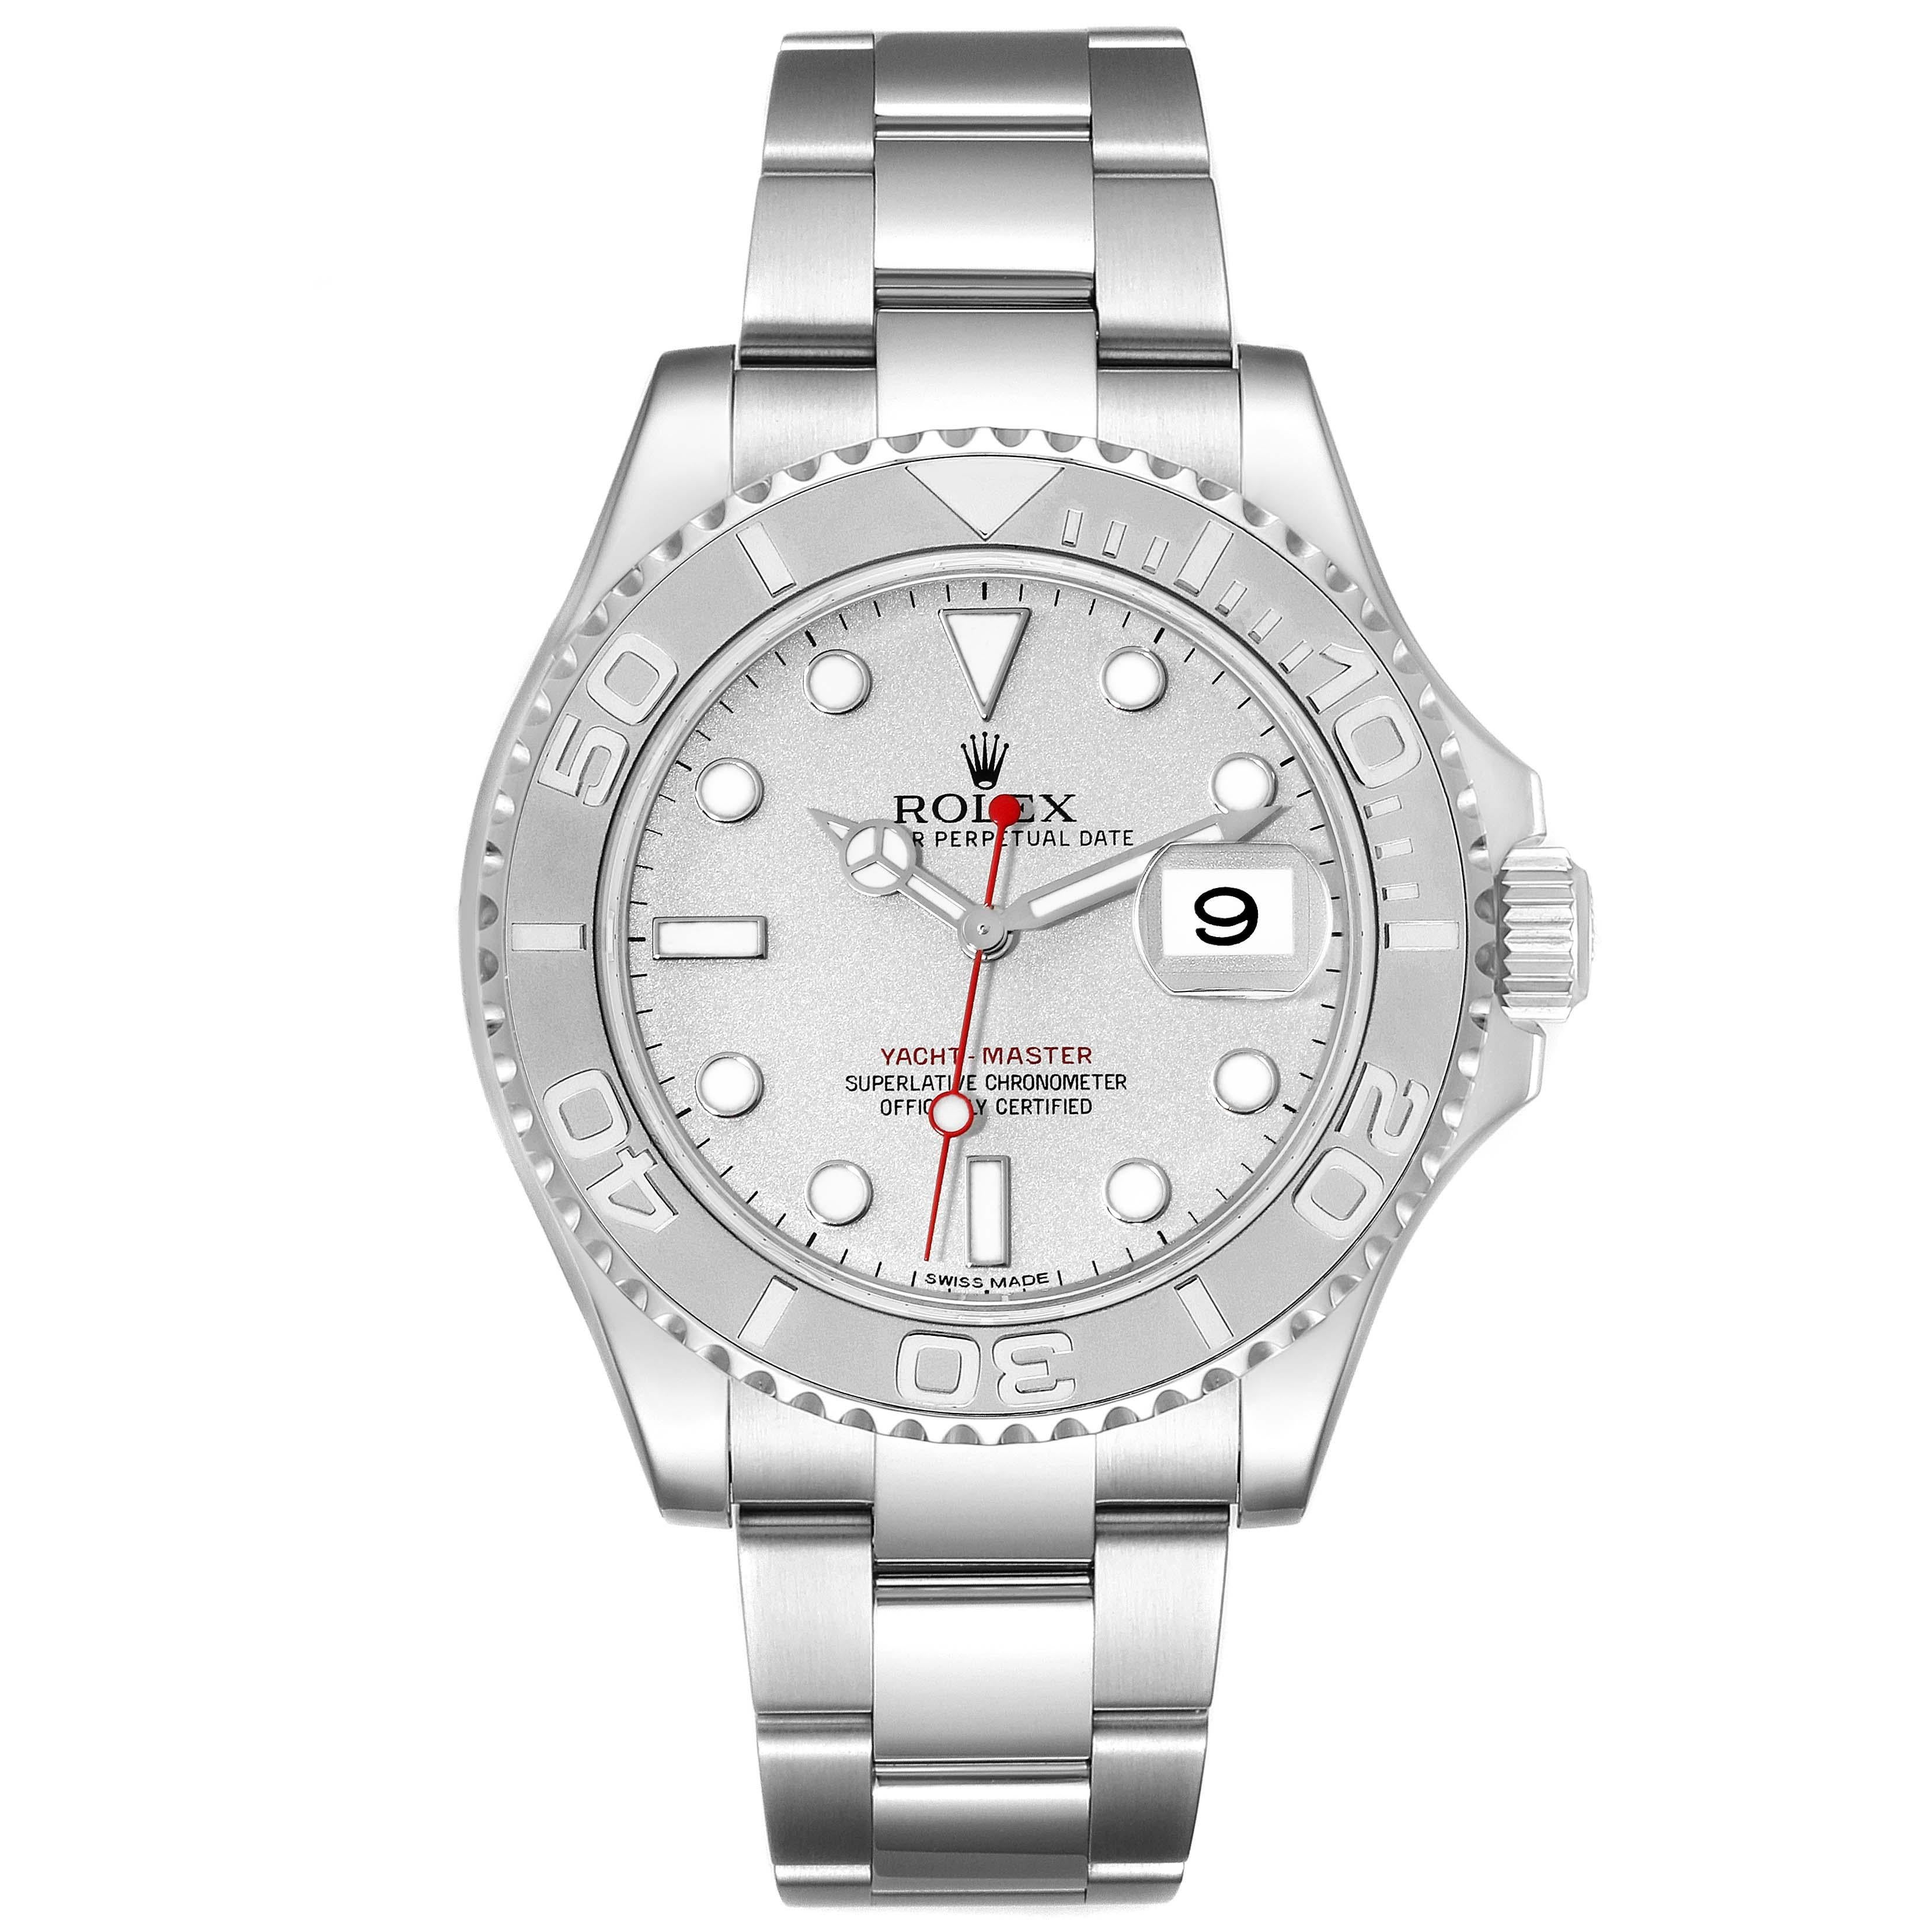 Rolex Yachtmaster Platinum Dial Steel Mens Watch 116622 Box Card. Officially certified chronometer automatic self-winding movement. Stainless steel case 40.0 mm in diameter. Rolex logo on the crown. Platinum special time-lapse bidirectional rotating